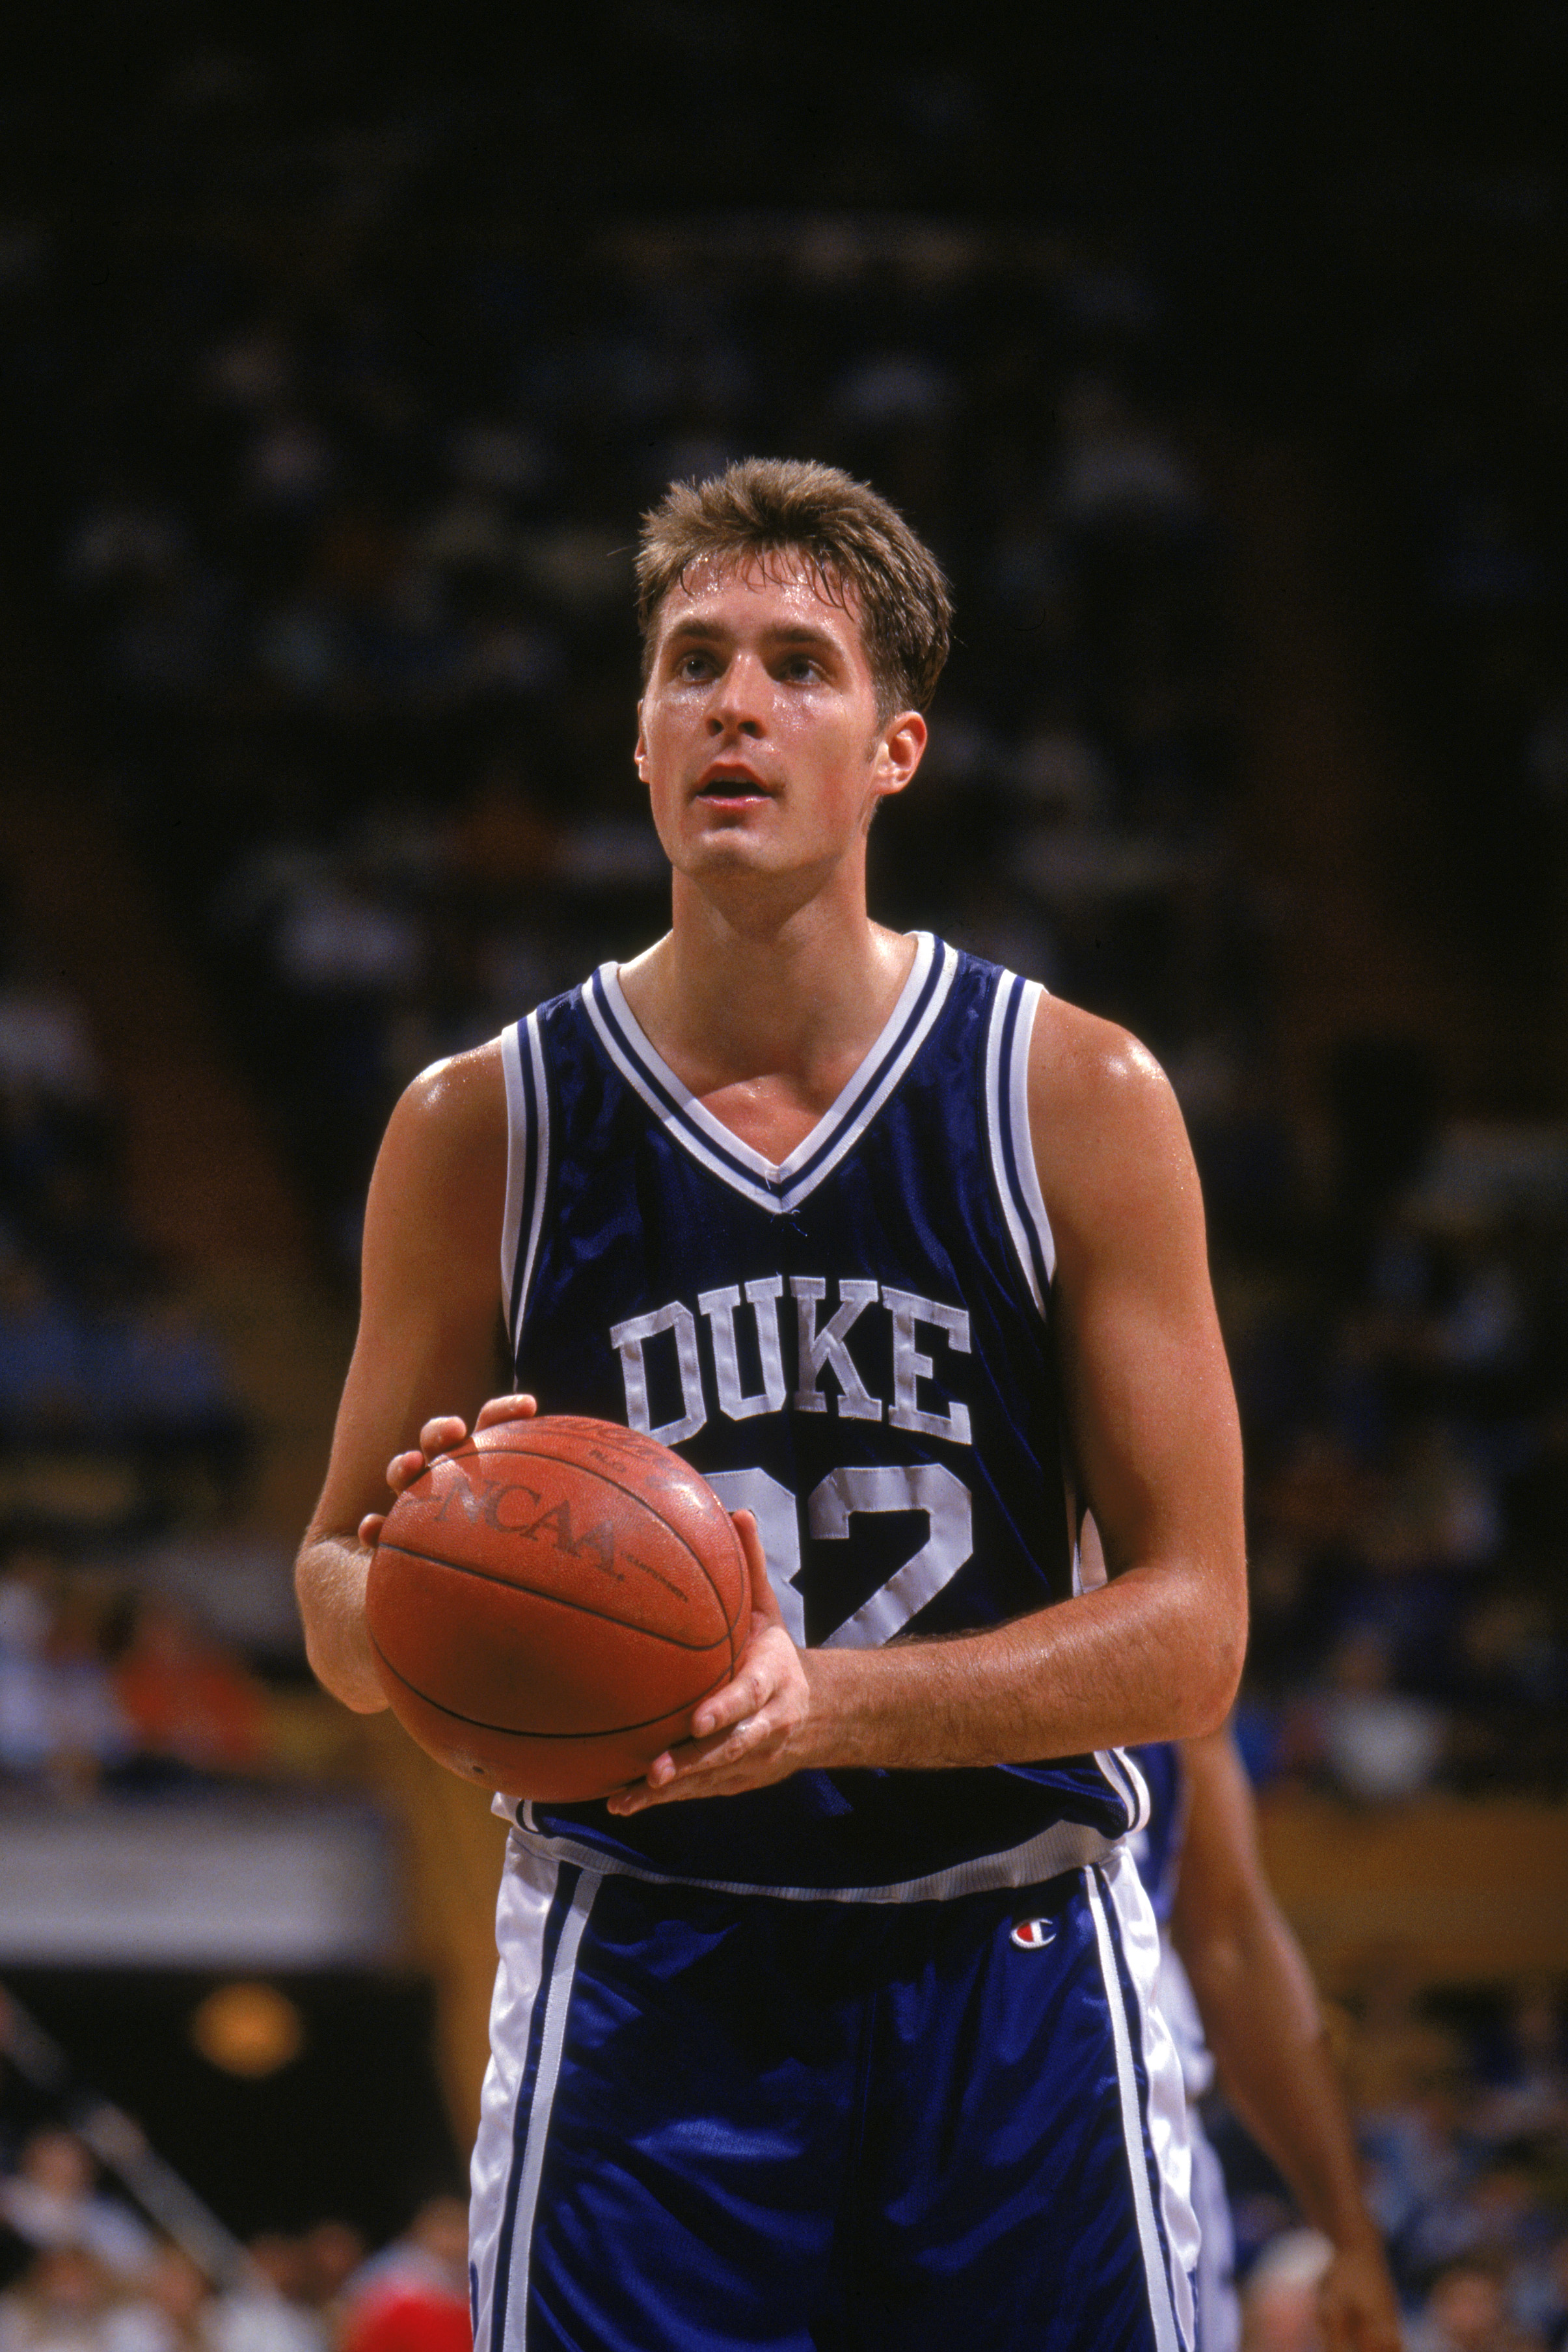 DECEMBER 7:  Christian Laettner #32 of the Duke University Blue Devils prepares to shoot a free throw during a NCAA game against Canisius College in December 7, 1991.  (Photo by Rick Stewart/Getty Images)